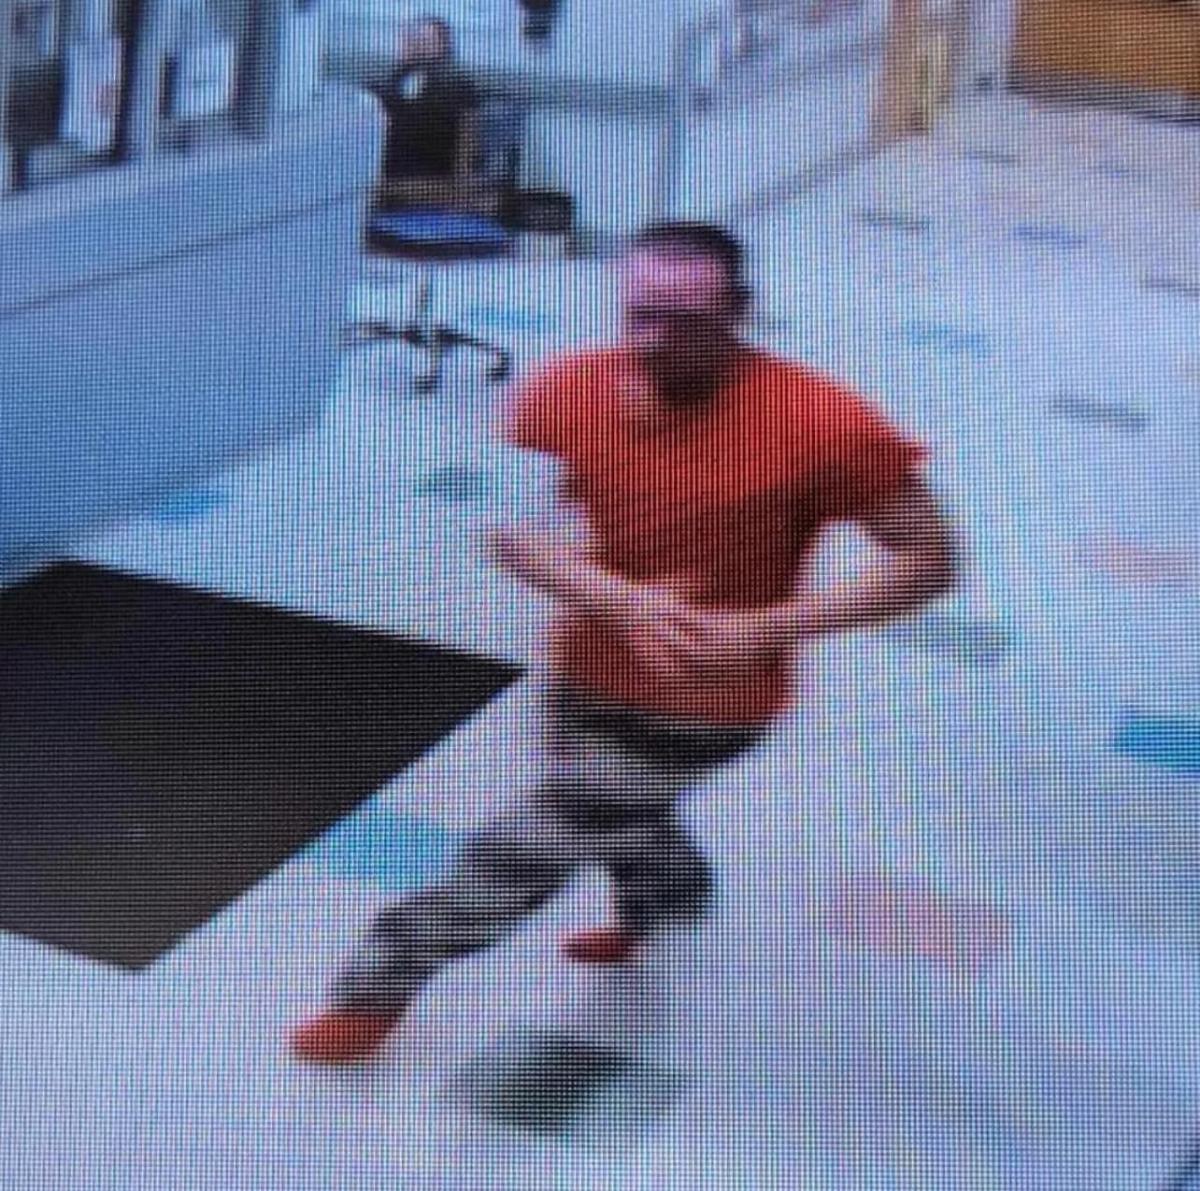 Colorado inmate overpowers deputy, escapes hospital; considered 'extremely dangerous'